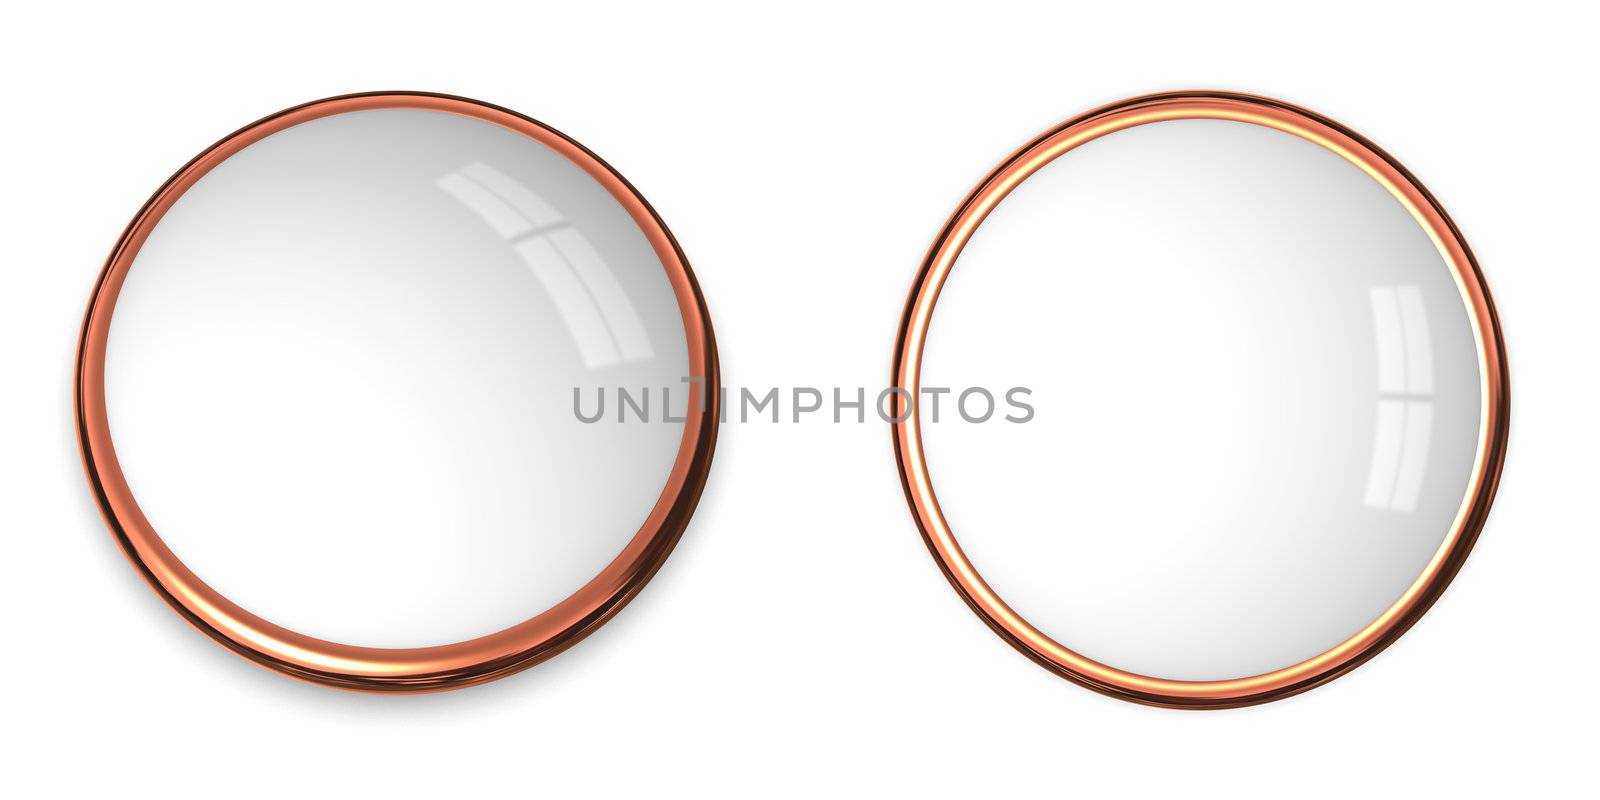 3D button template in solid bronze/copper and white surface